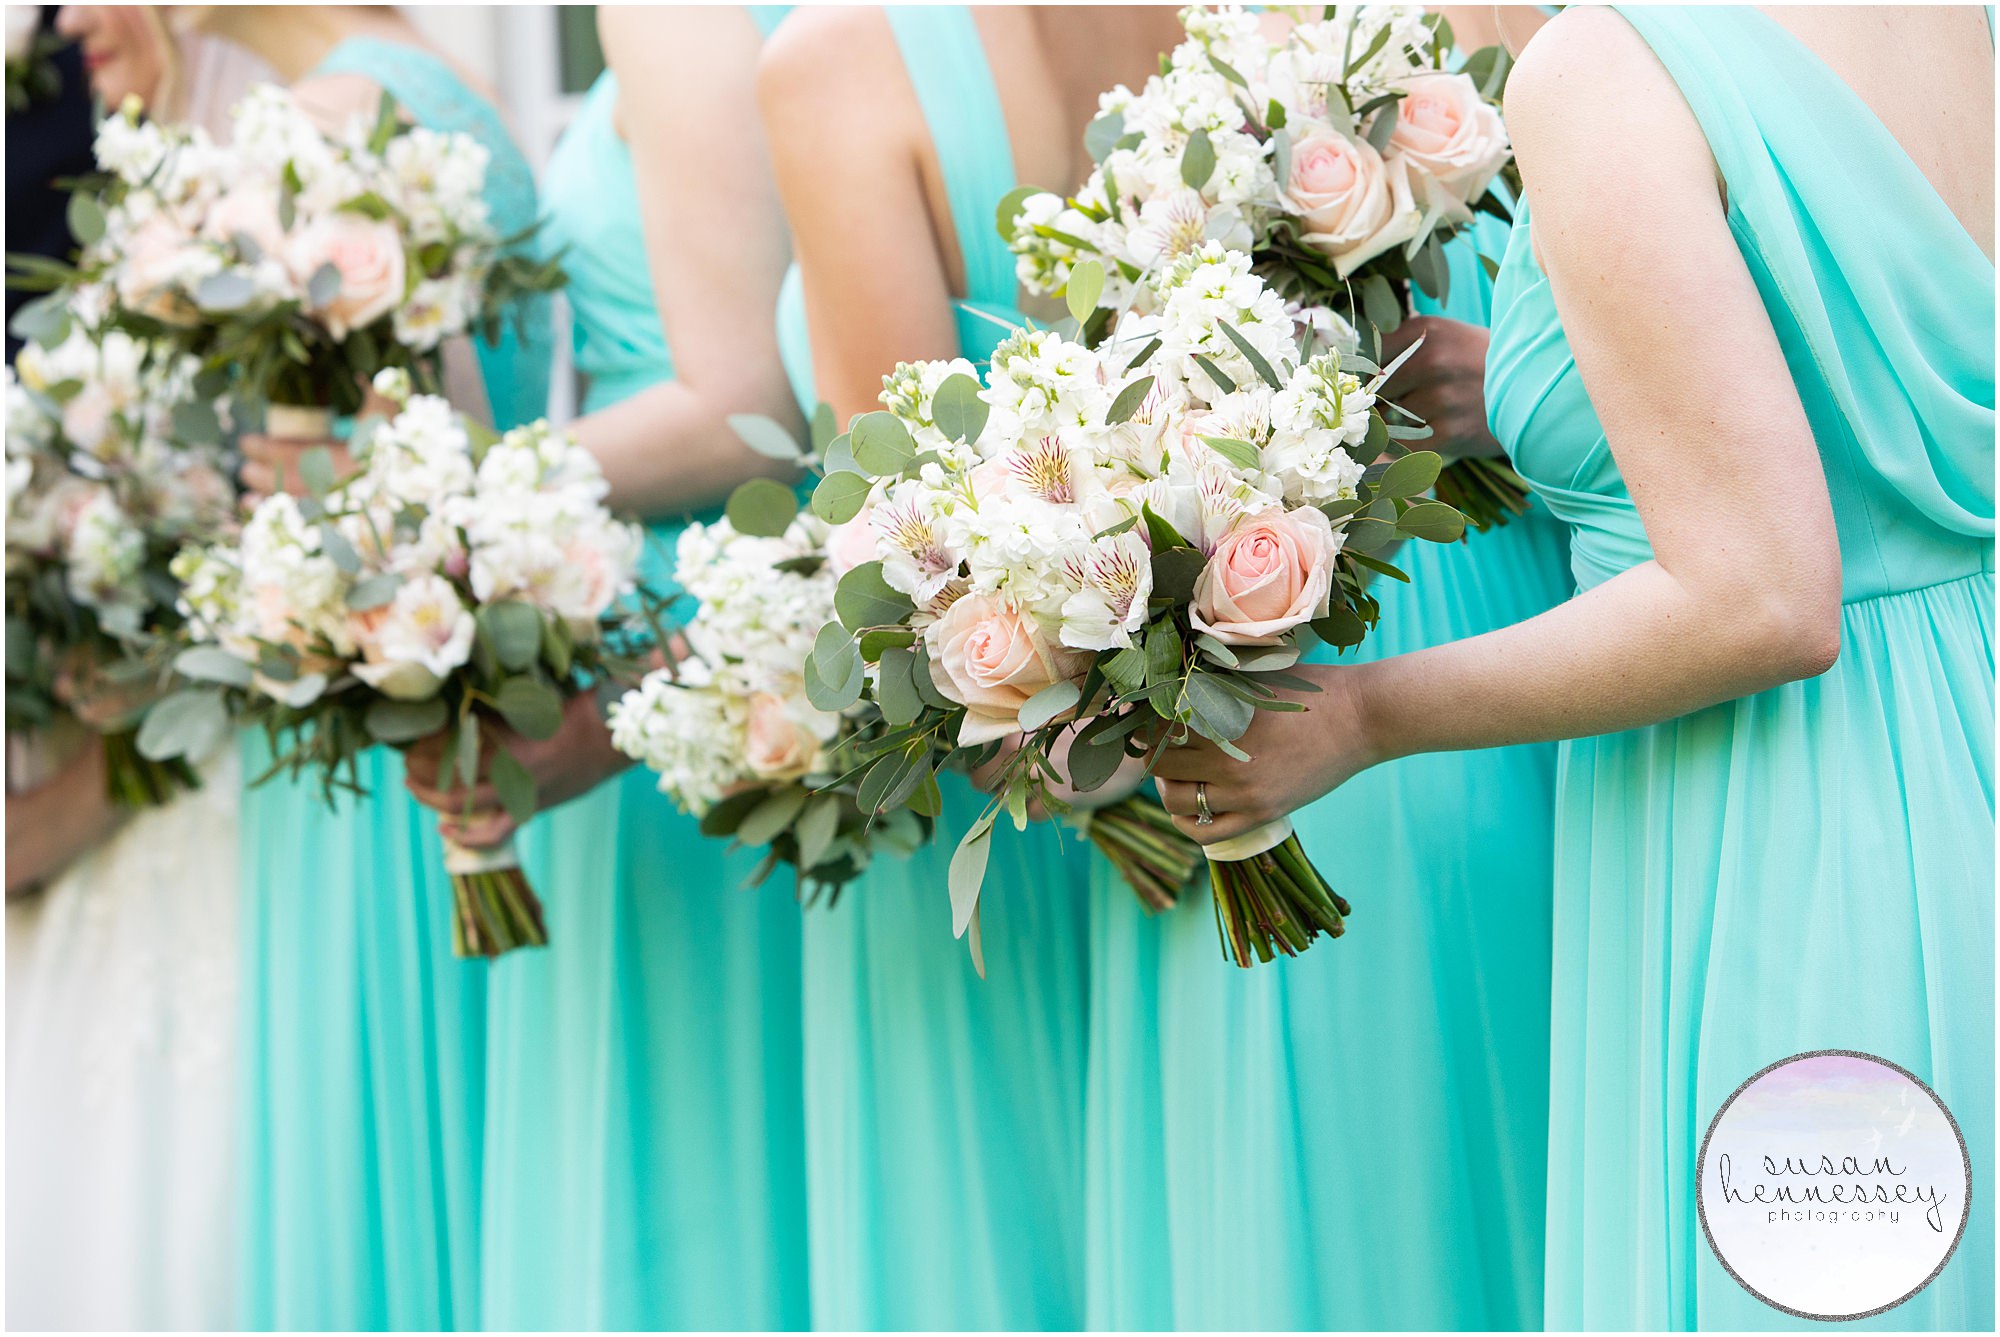 Detail of bridesmaid bouquets.